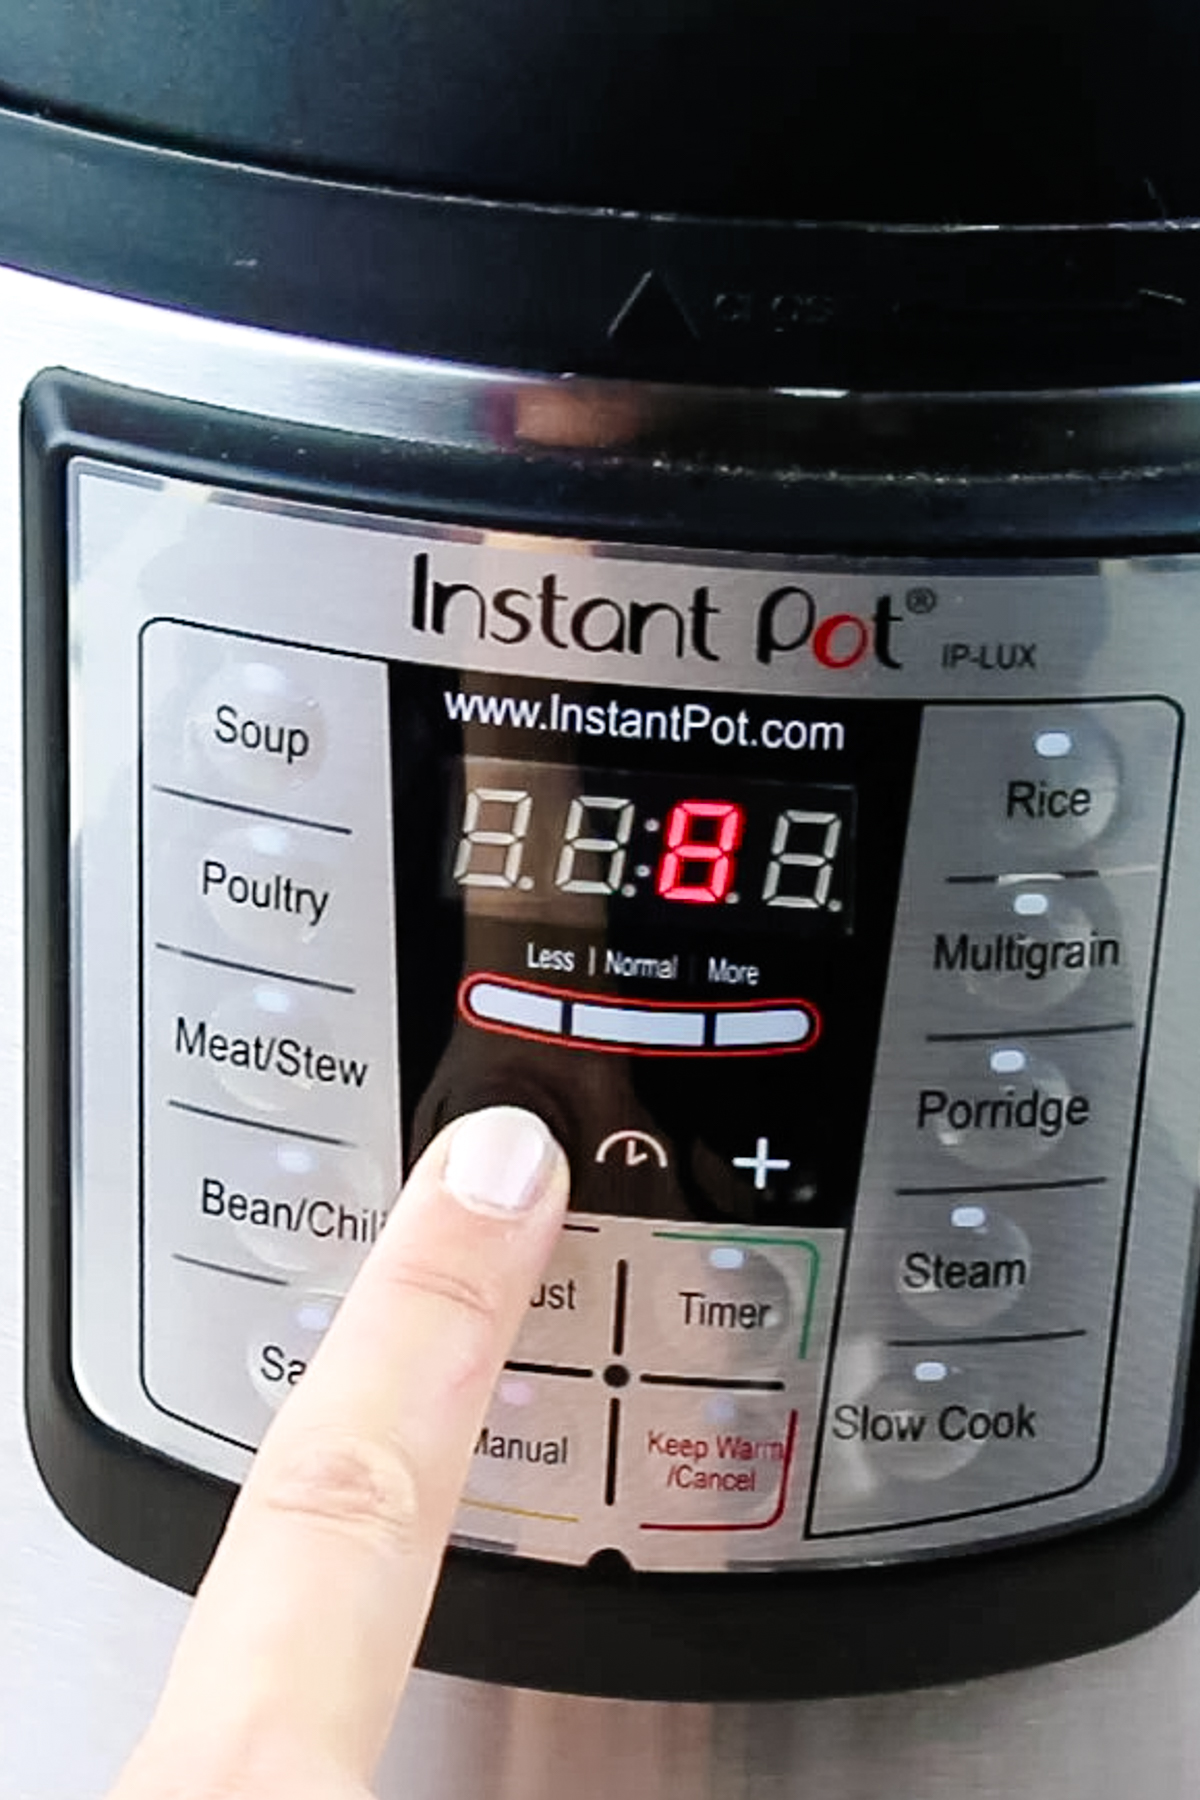 instant pot set to manual and time reduced to 8 minutes.